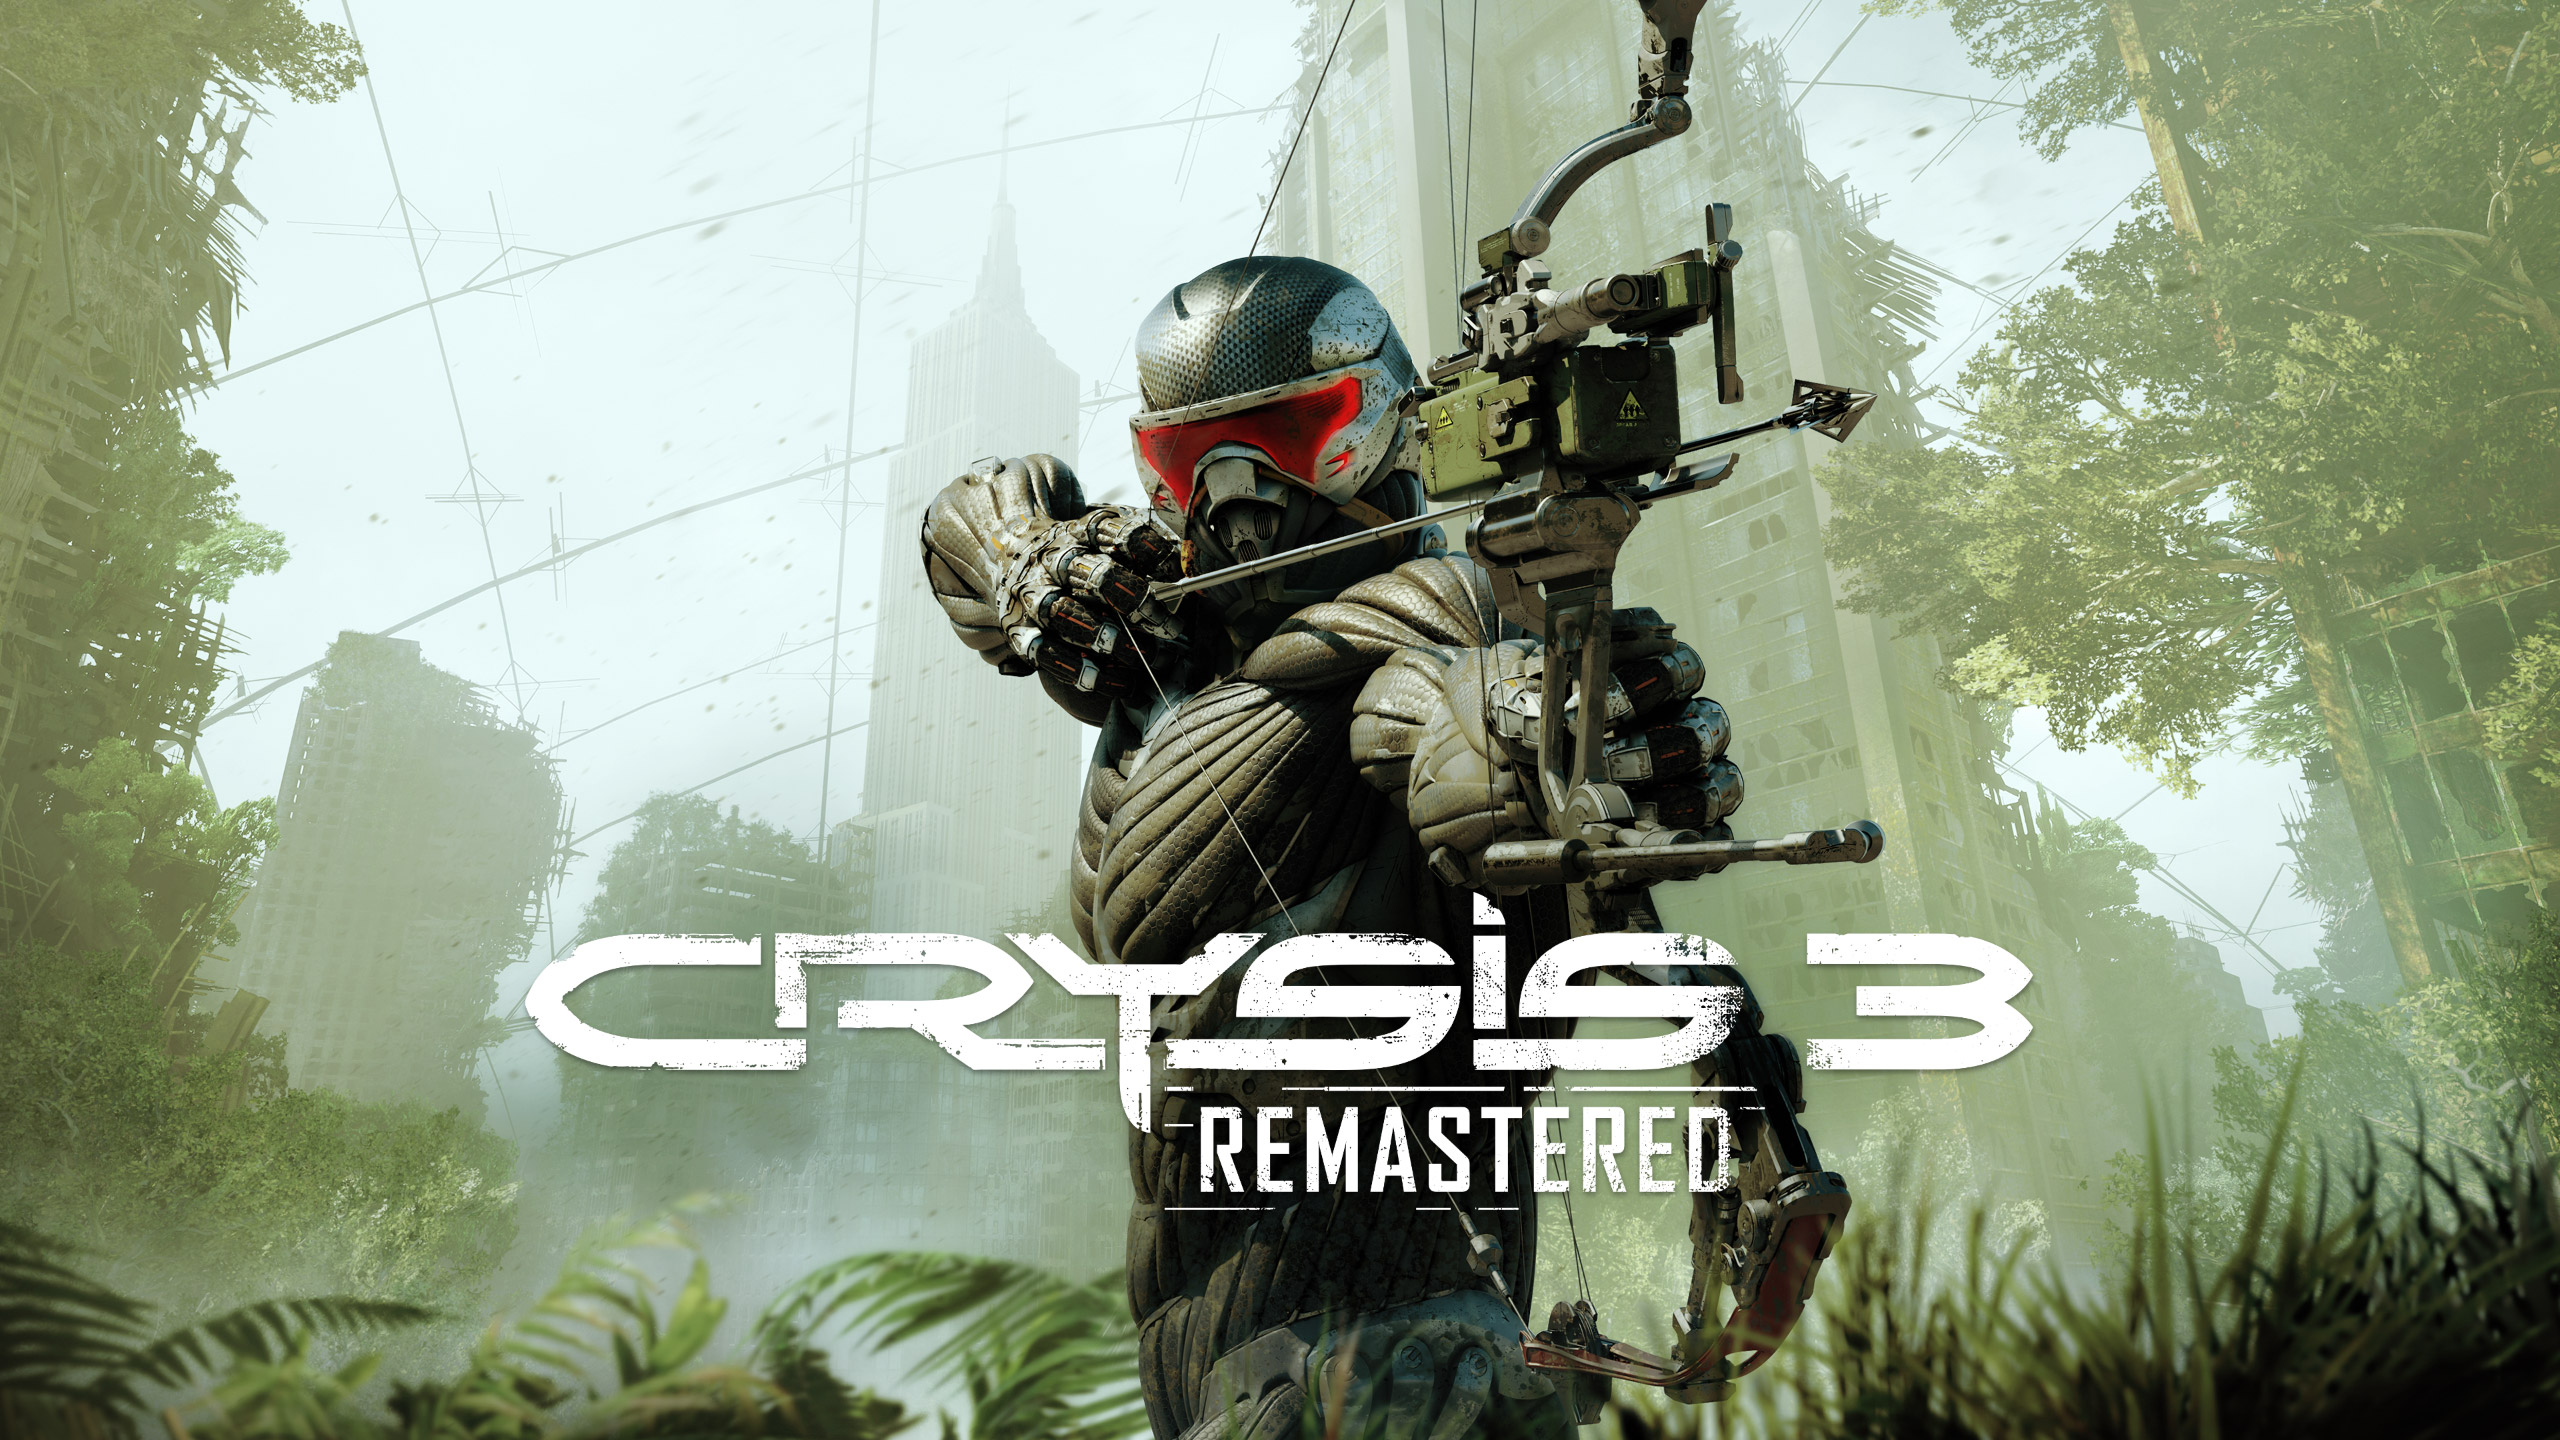 Crysis 3 Remastered. Download and Buy Today Games Store